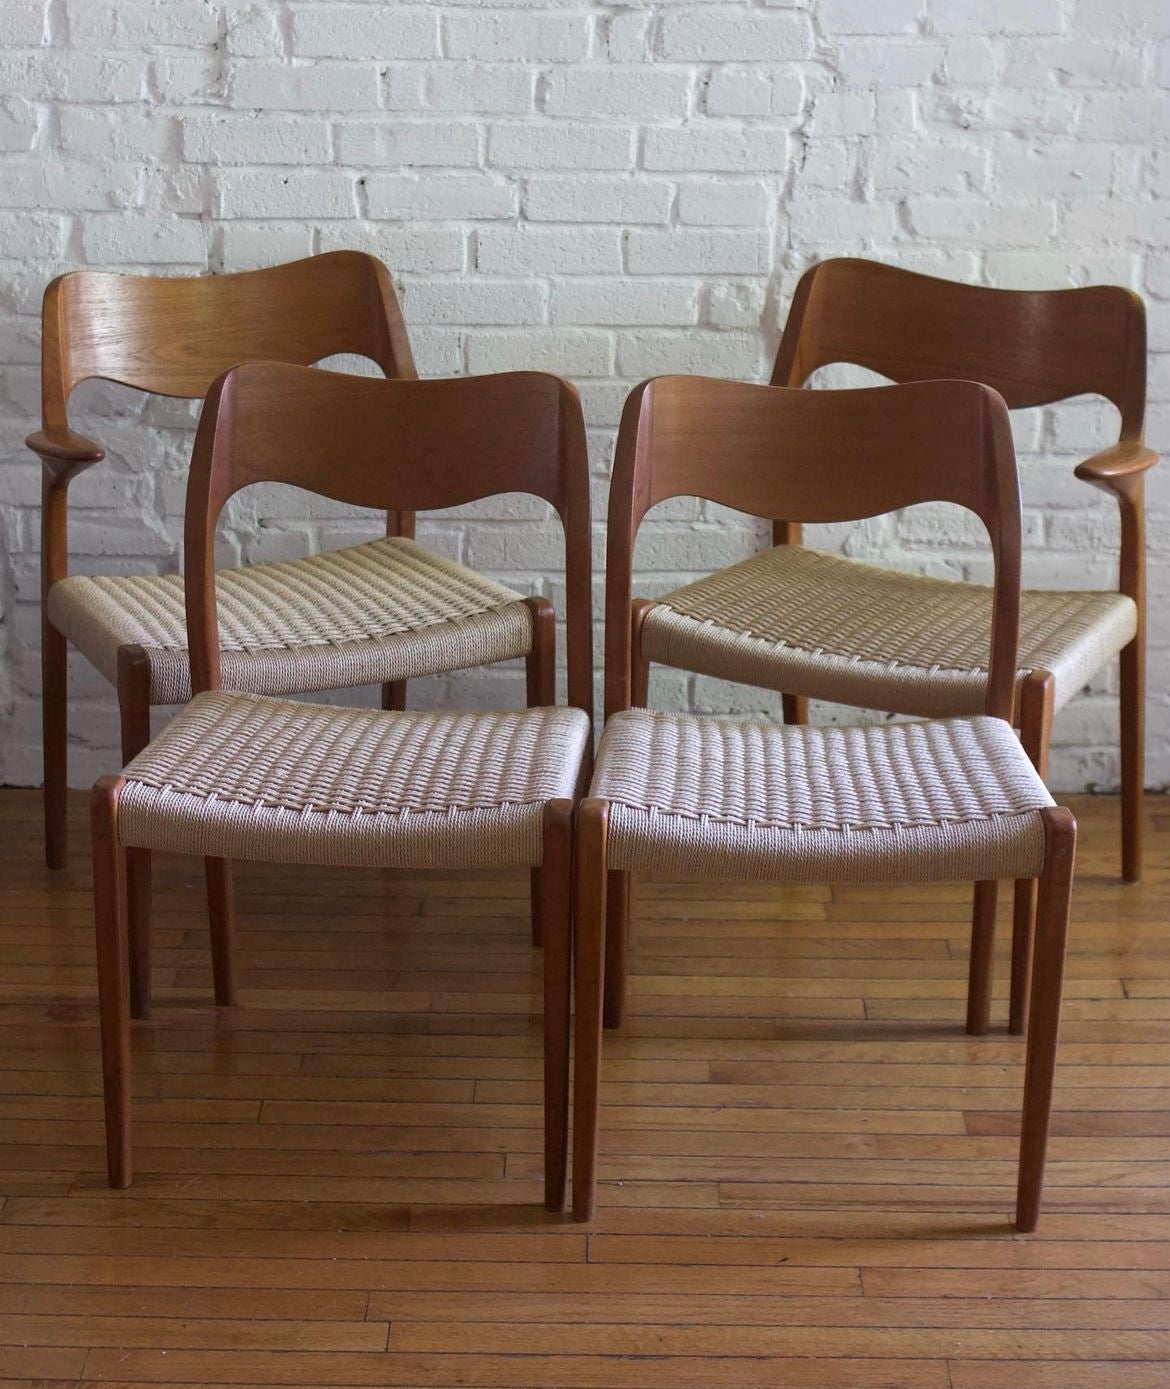 A fantastic set of 4 Niels O. Møller dining chairs - including two Model 71 chairs and two highly sought-after matching Model 55 captains chairs. Sculptural hardwood teak frame and Danish cord seats. New Danish cord was just completed. 

Made in